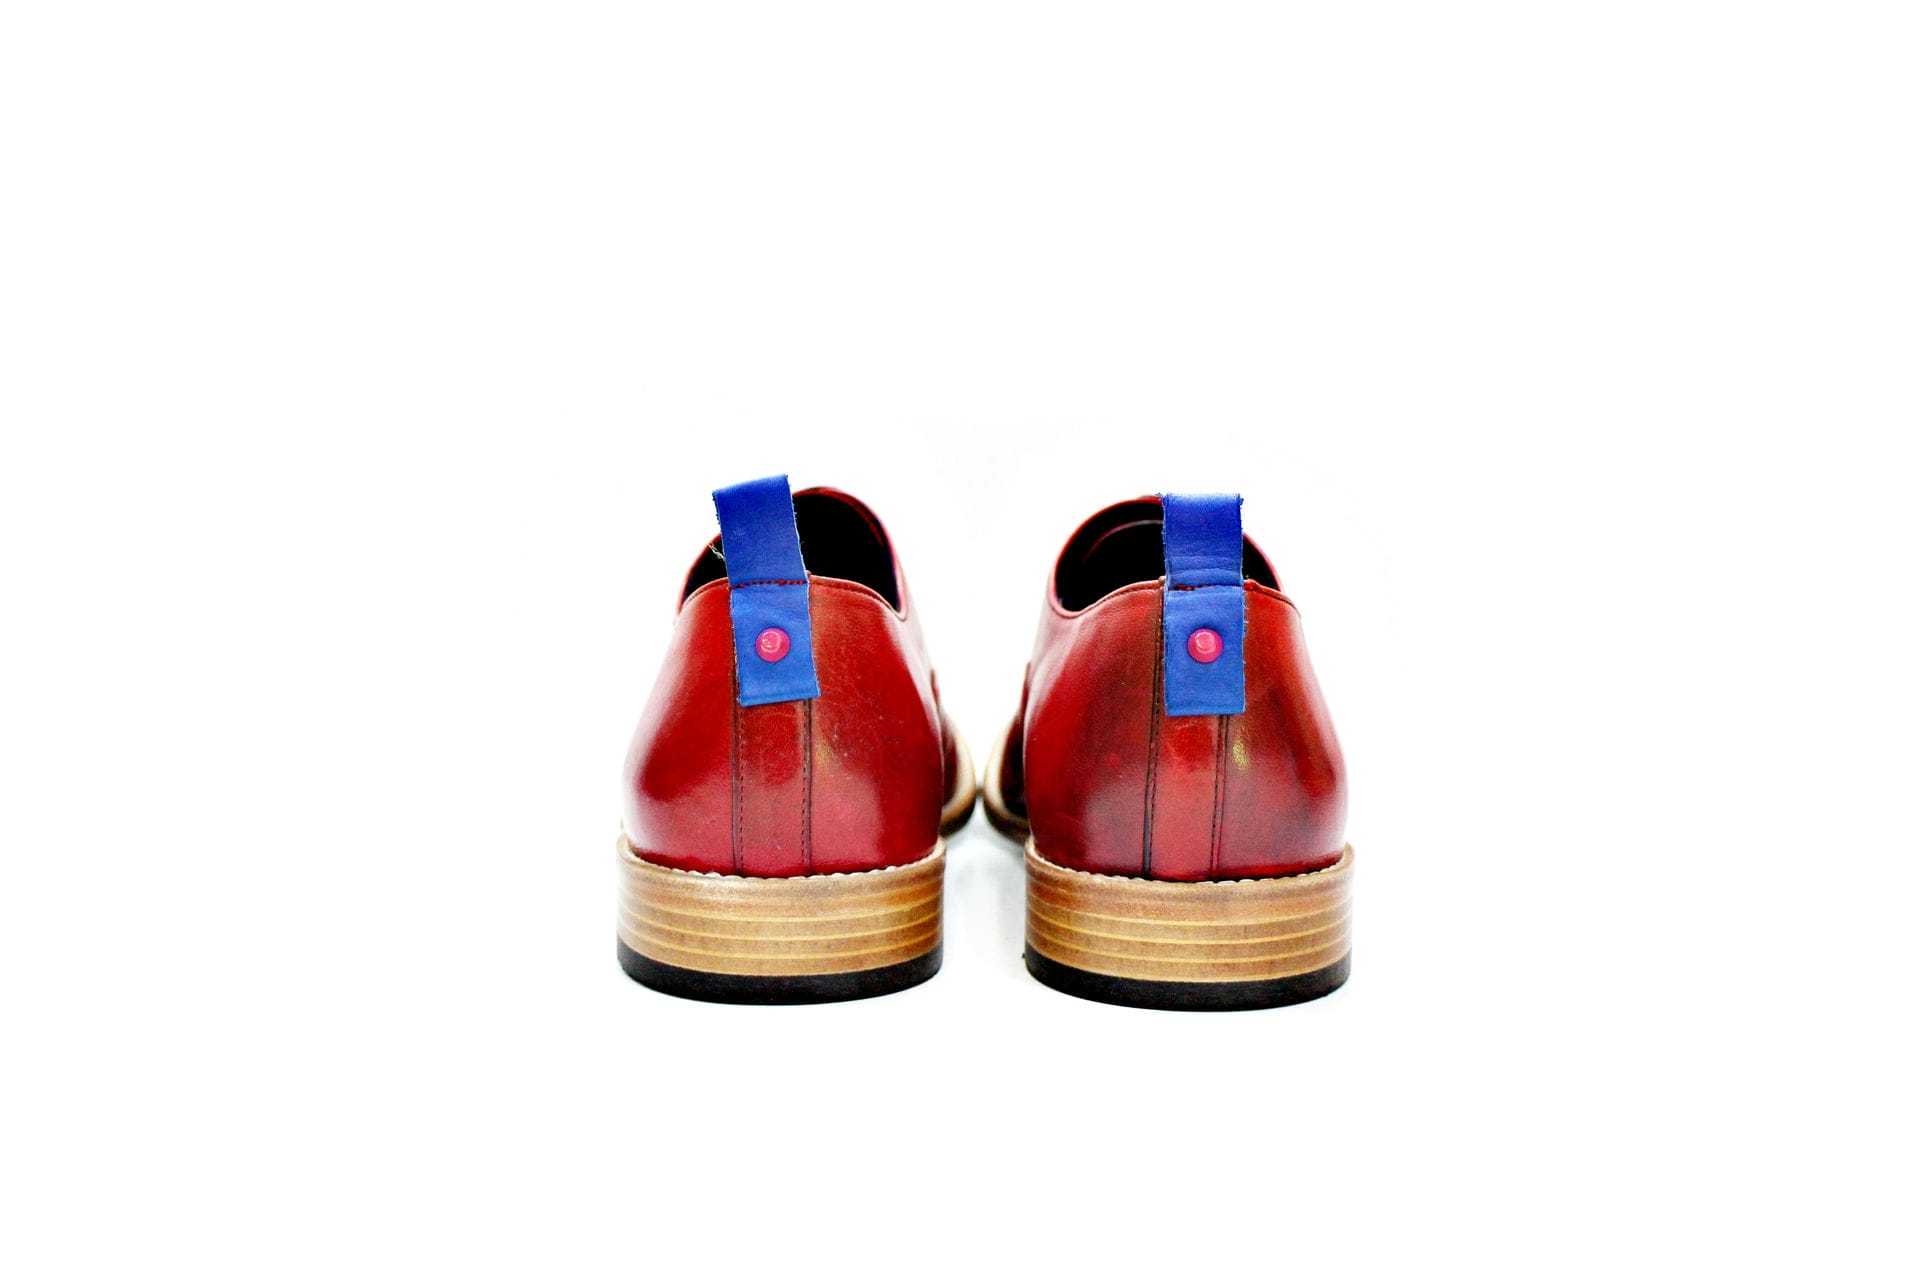 Shoe consisting of red leather externally, with cow lining made to this. “Walk with pintta”